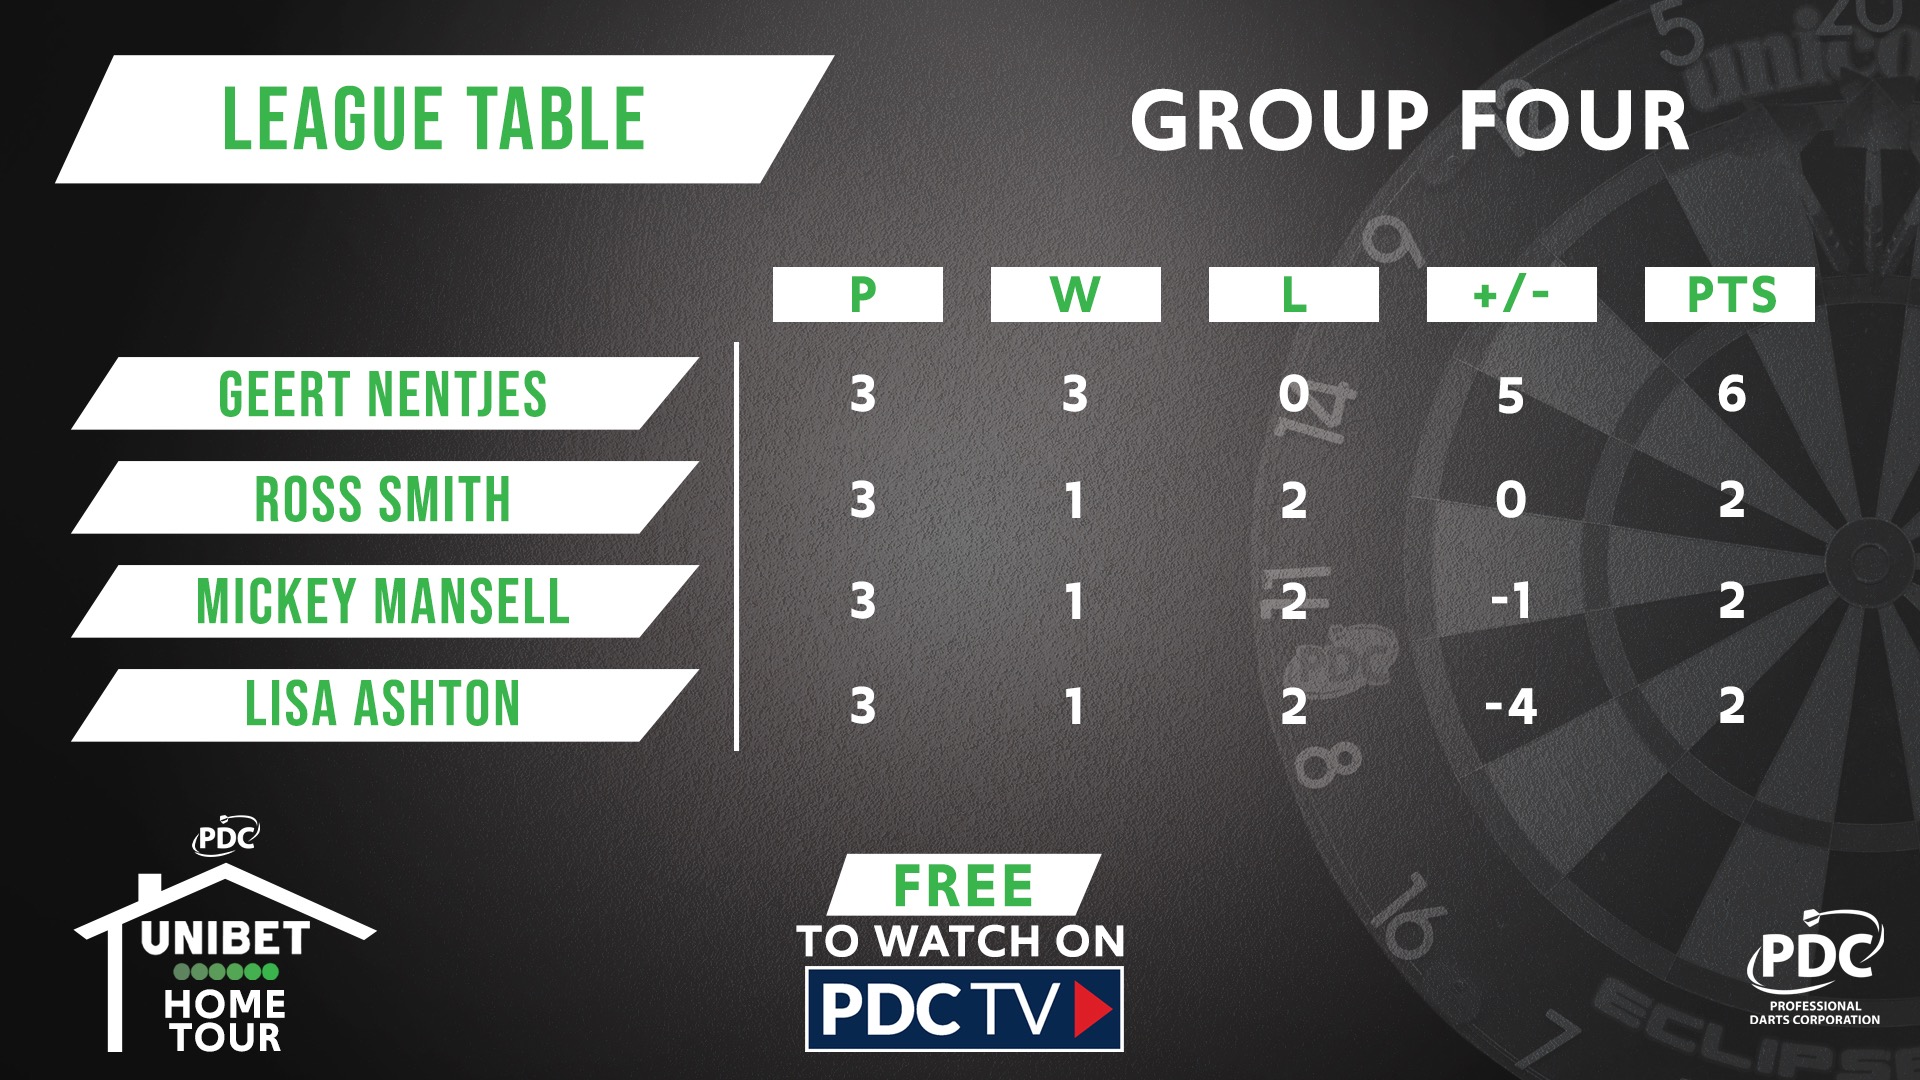 Group Four table